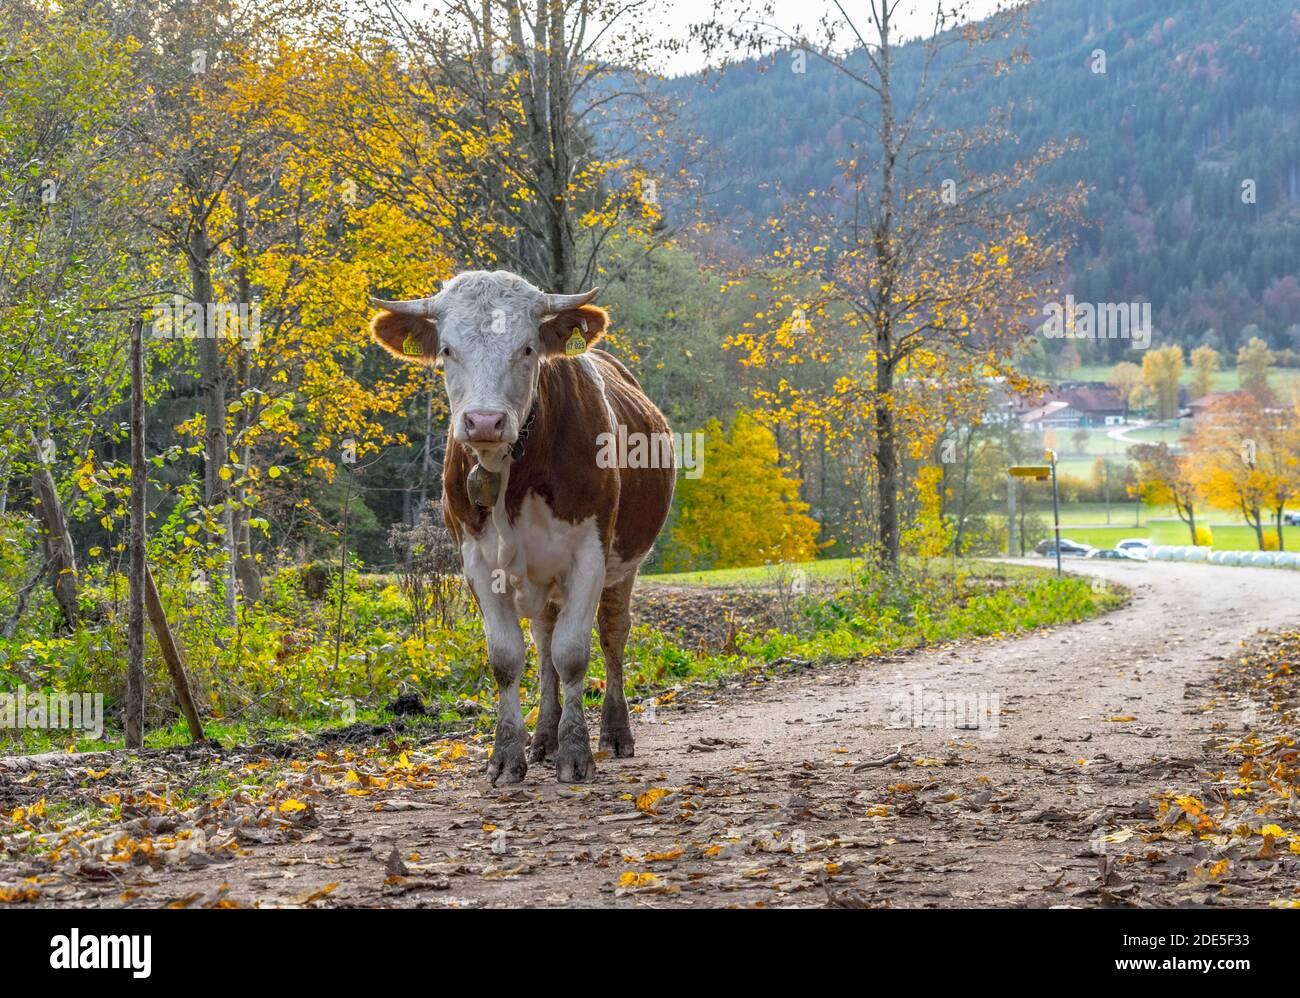 Autumn Landscape with grazing cows and calves Stock Photo